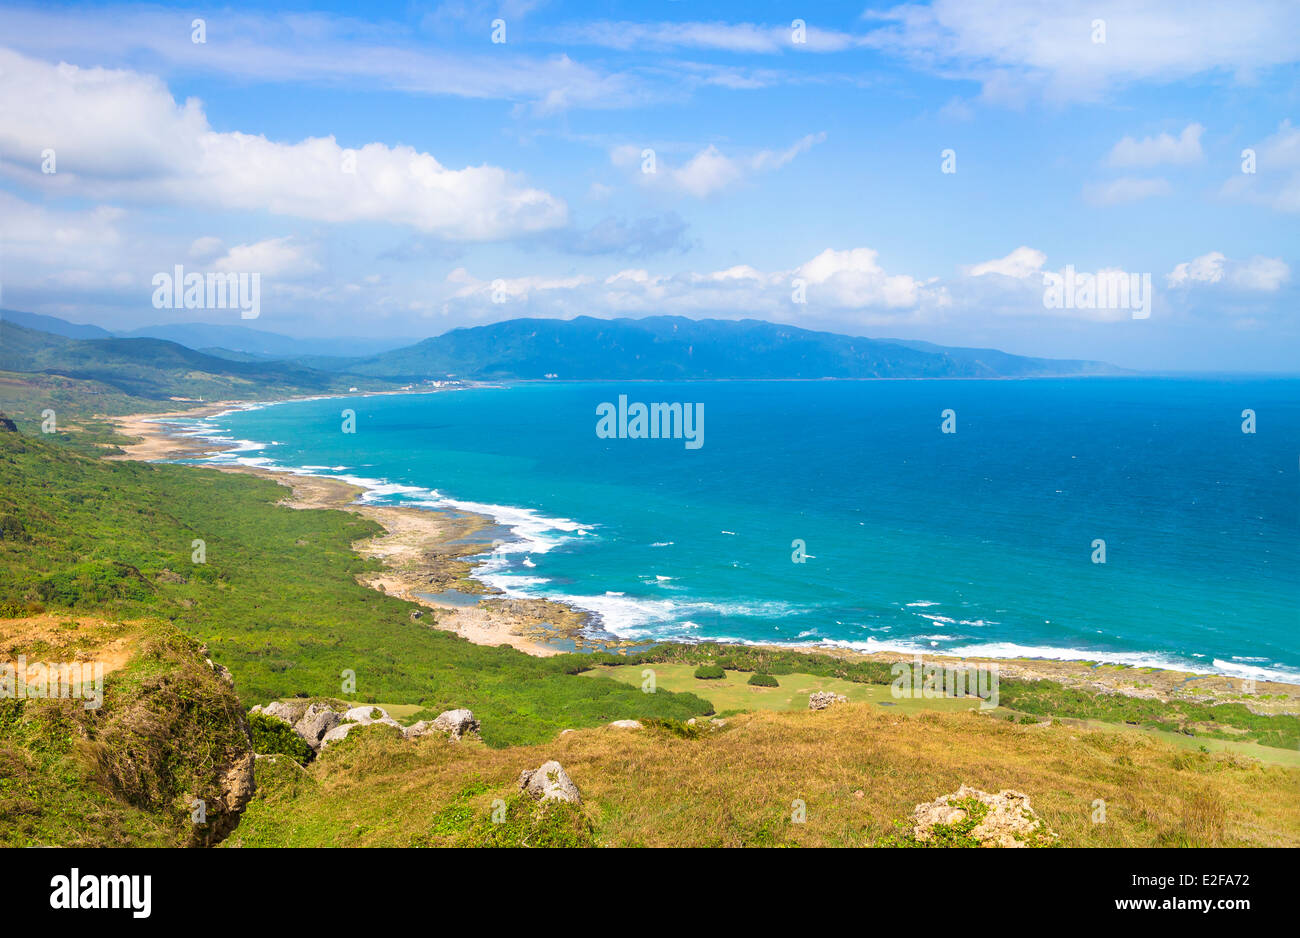 Taiwan famous Sightseeing attractions. Kenting National Park Stock Photo